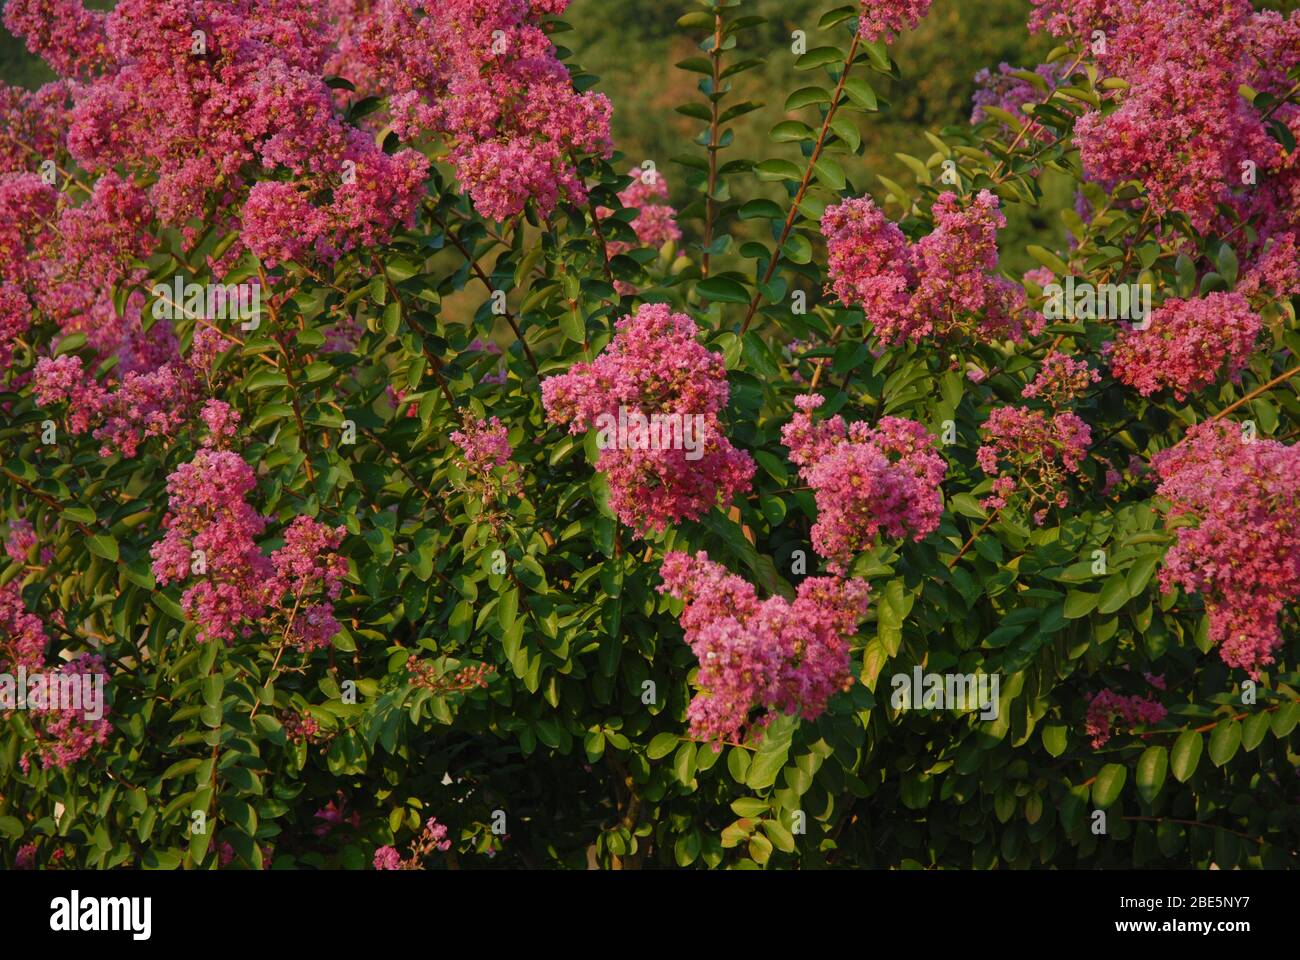 Pink flowers on a Crape myrtle, also known as Lagerstroemia indica Stock Photo